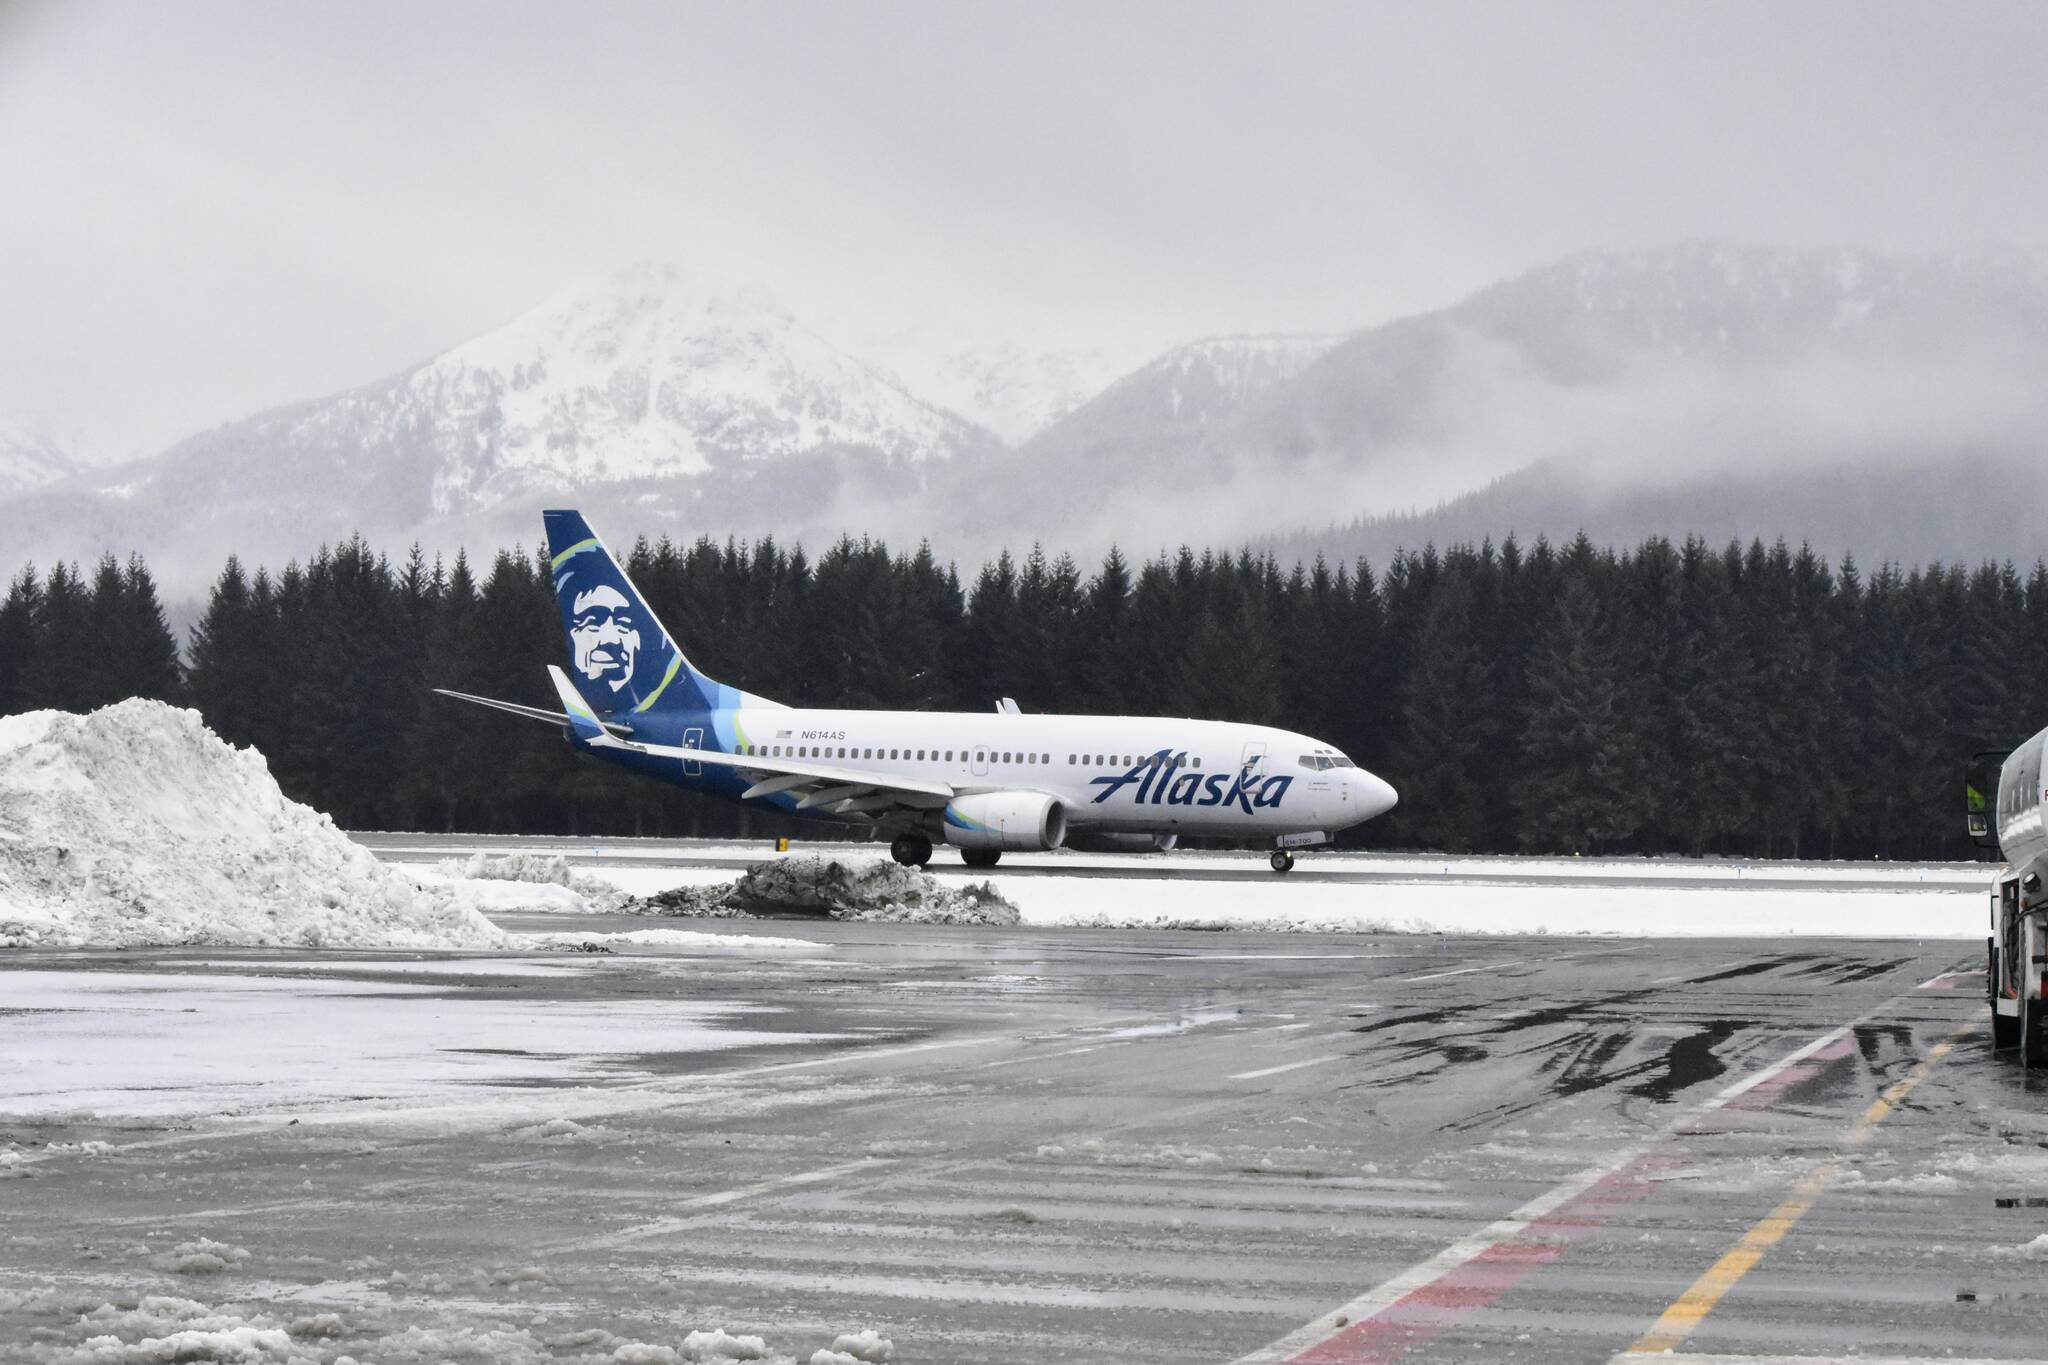 An Alaska Airlines flight lands at the Juneau International Airport on Monday, Nov. 22, 2021, amid a day of rain and snow. The National Weather Services issued a winter storm warning for Tuesday to Thursday, which covers "Black Wednesday," the busiest travel day of the year. (Peter Segall / Juneau Empire)